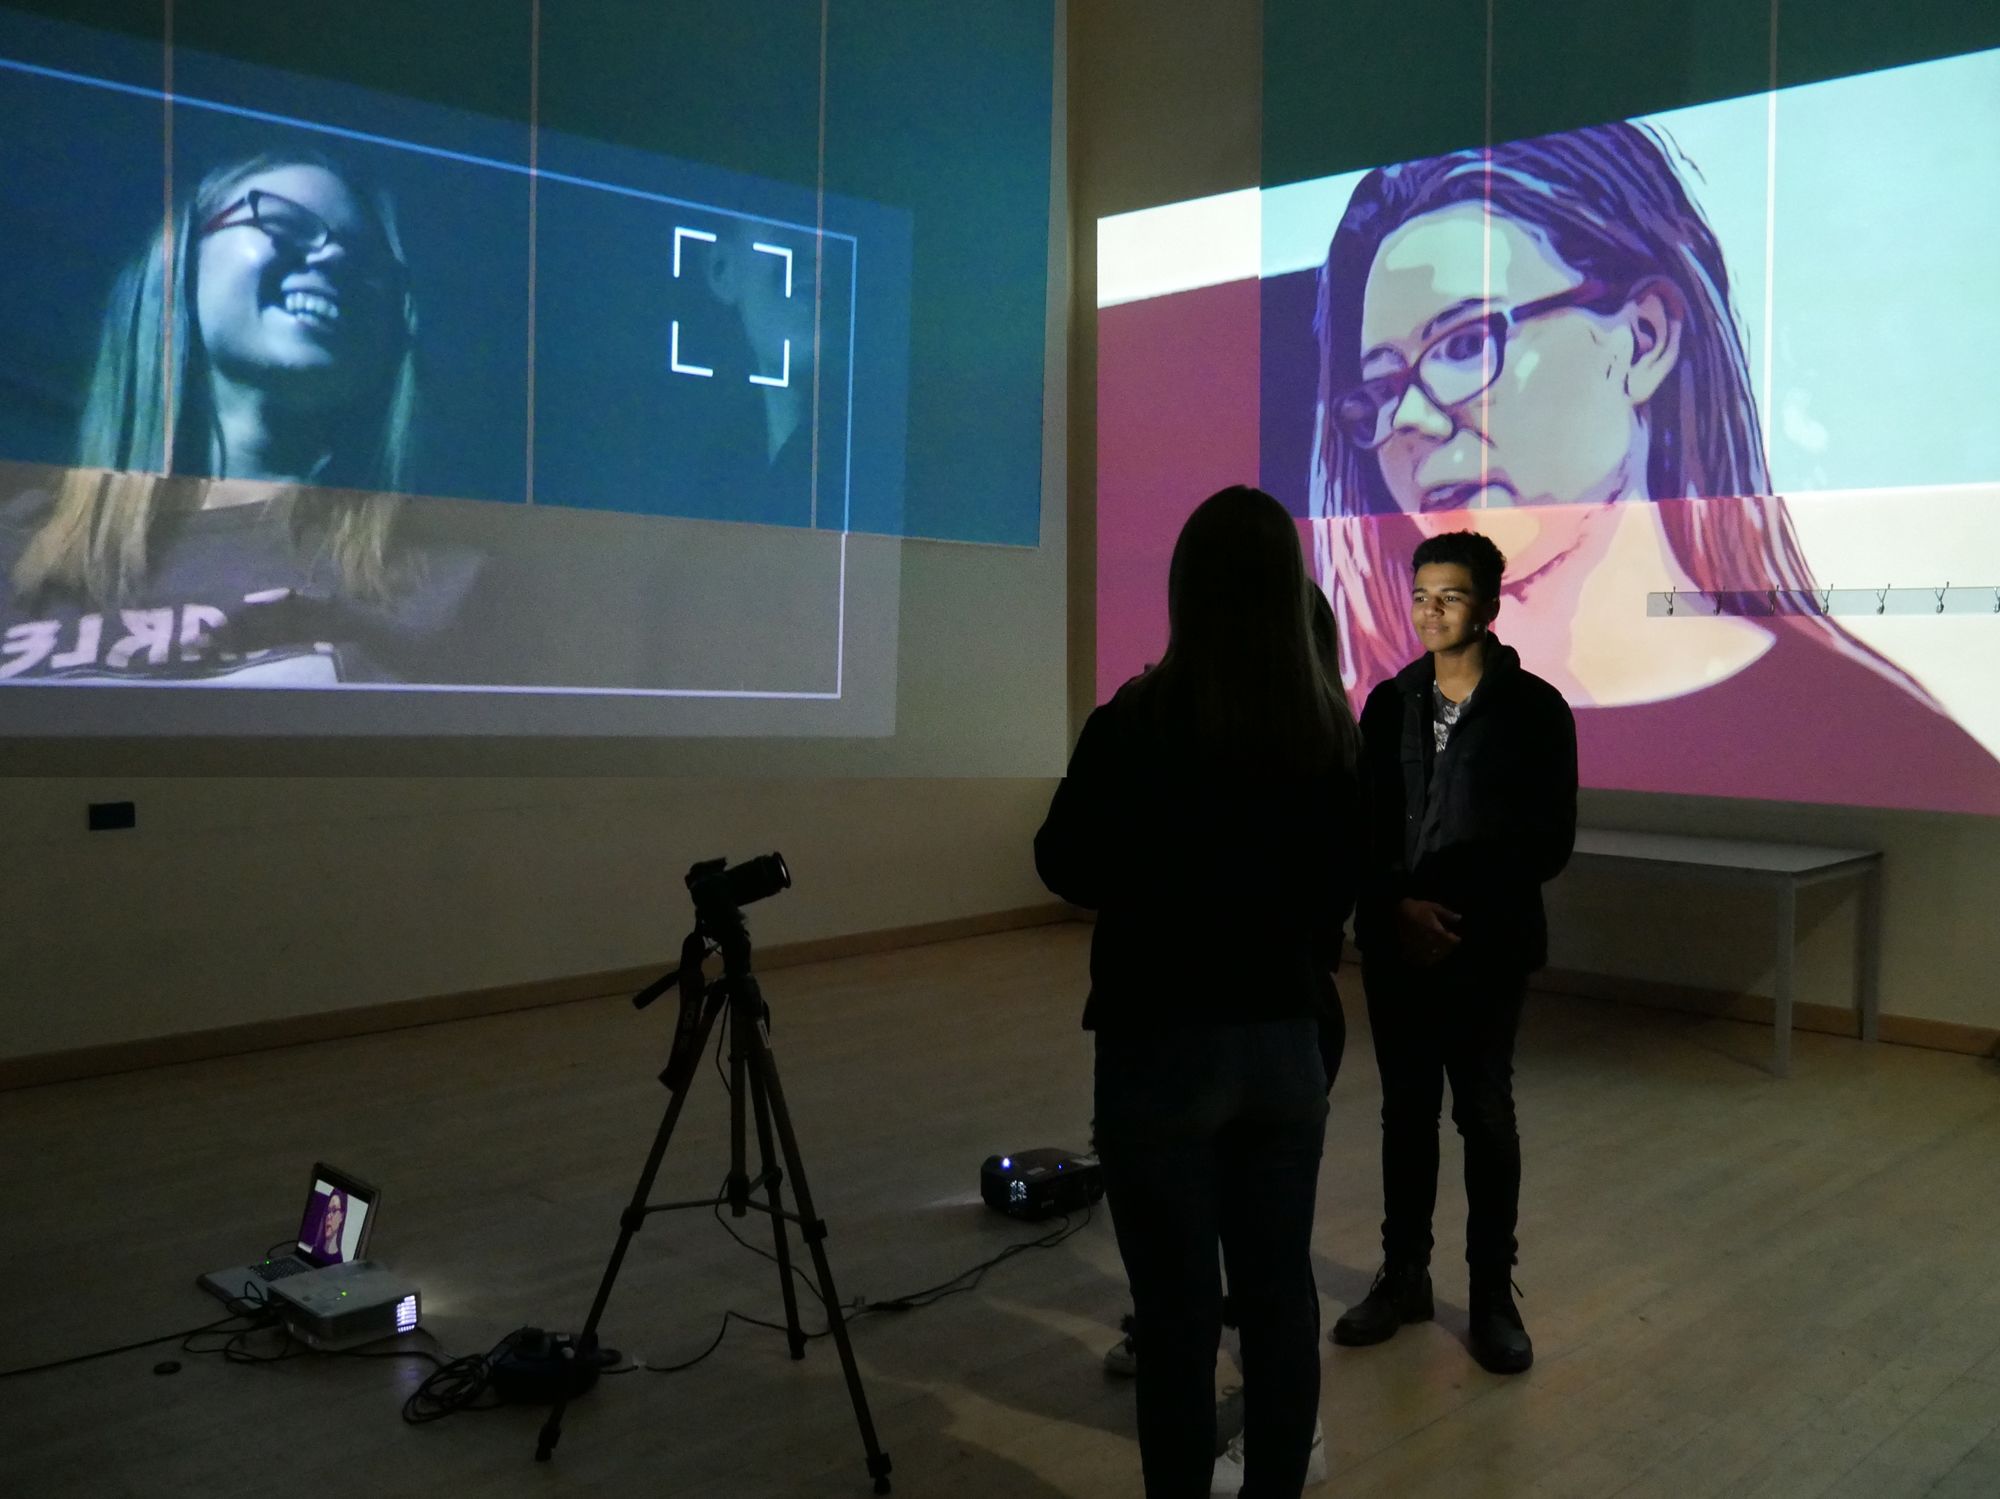 photograph of two students in a dark room with projections of their faces on walls